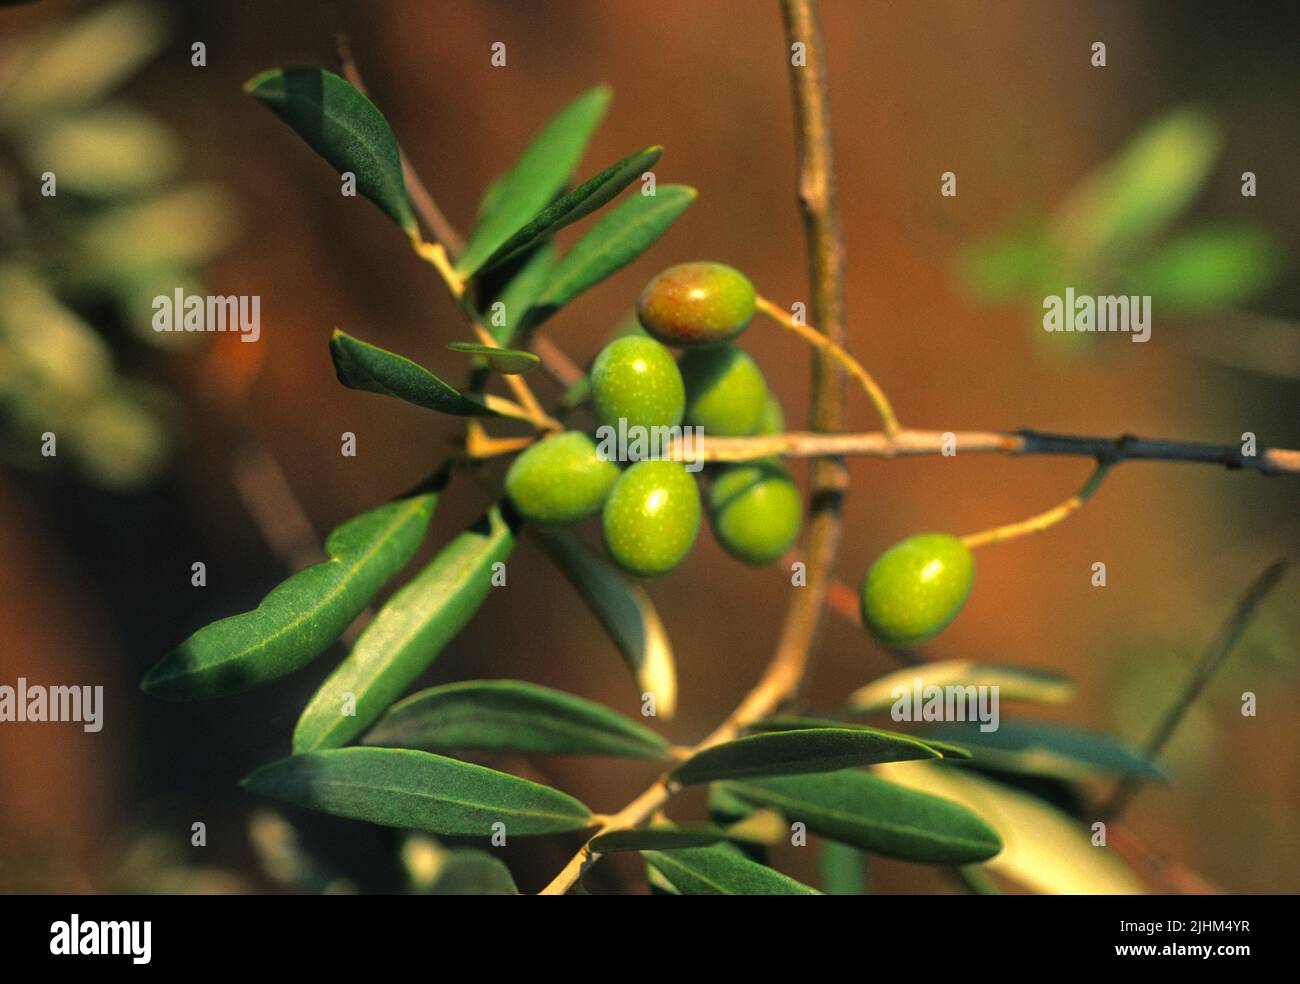 olives growing on a tree branch in Italy. Olive tree branch closeup Stock Photo